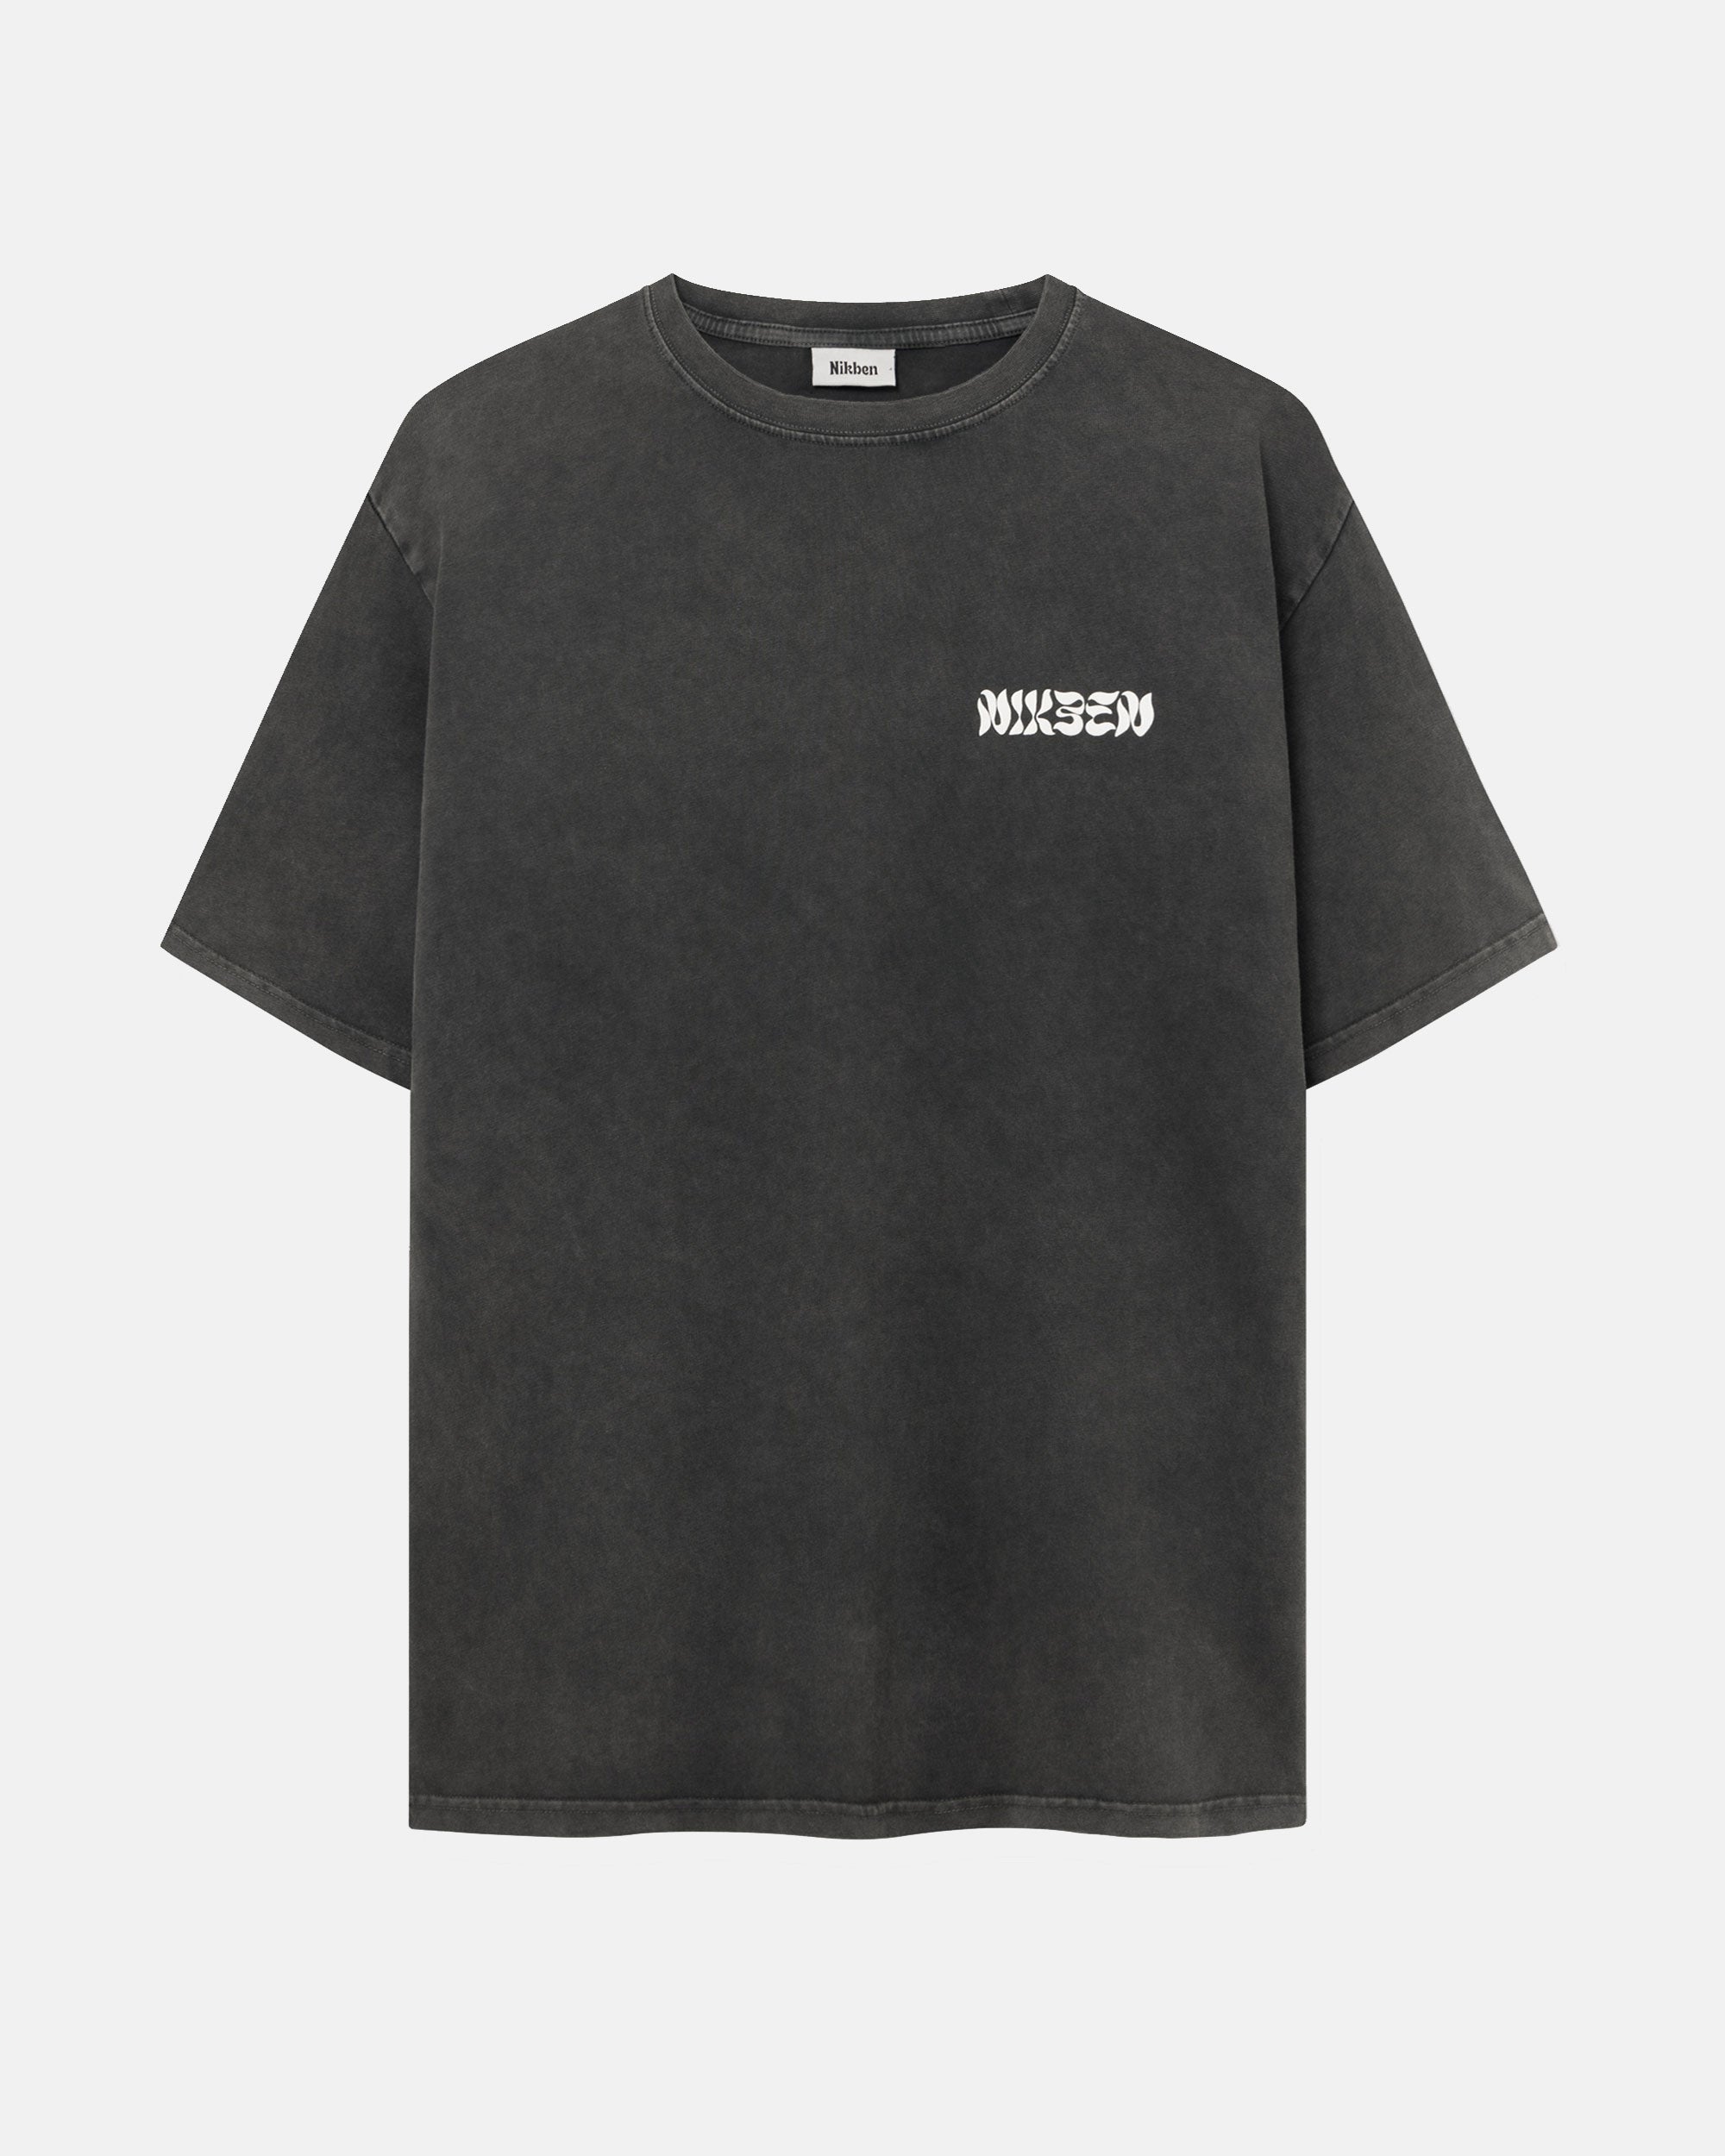 Washed black t-shirt with white 